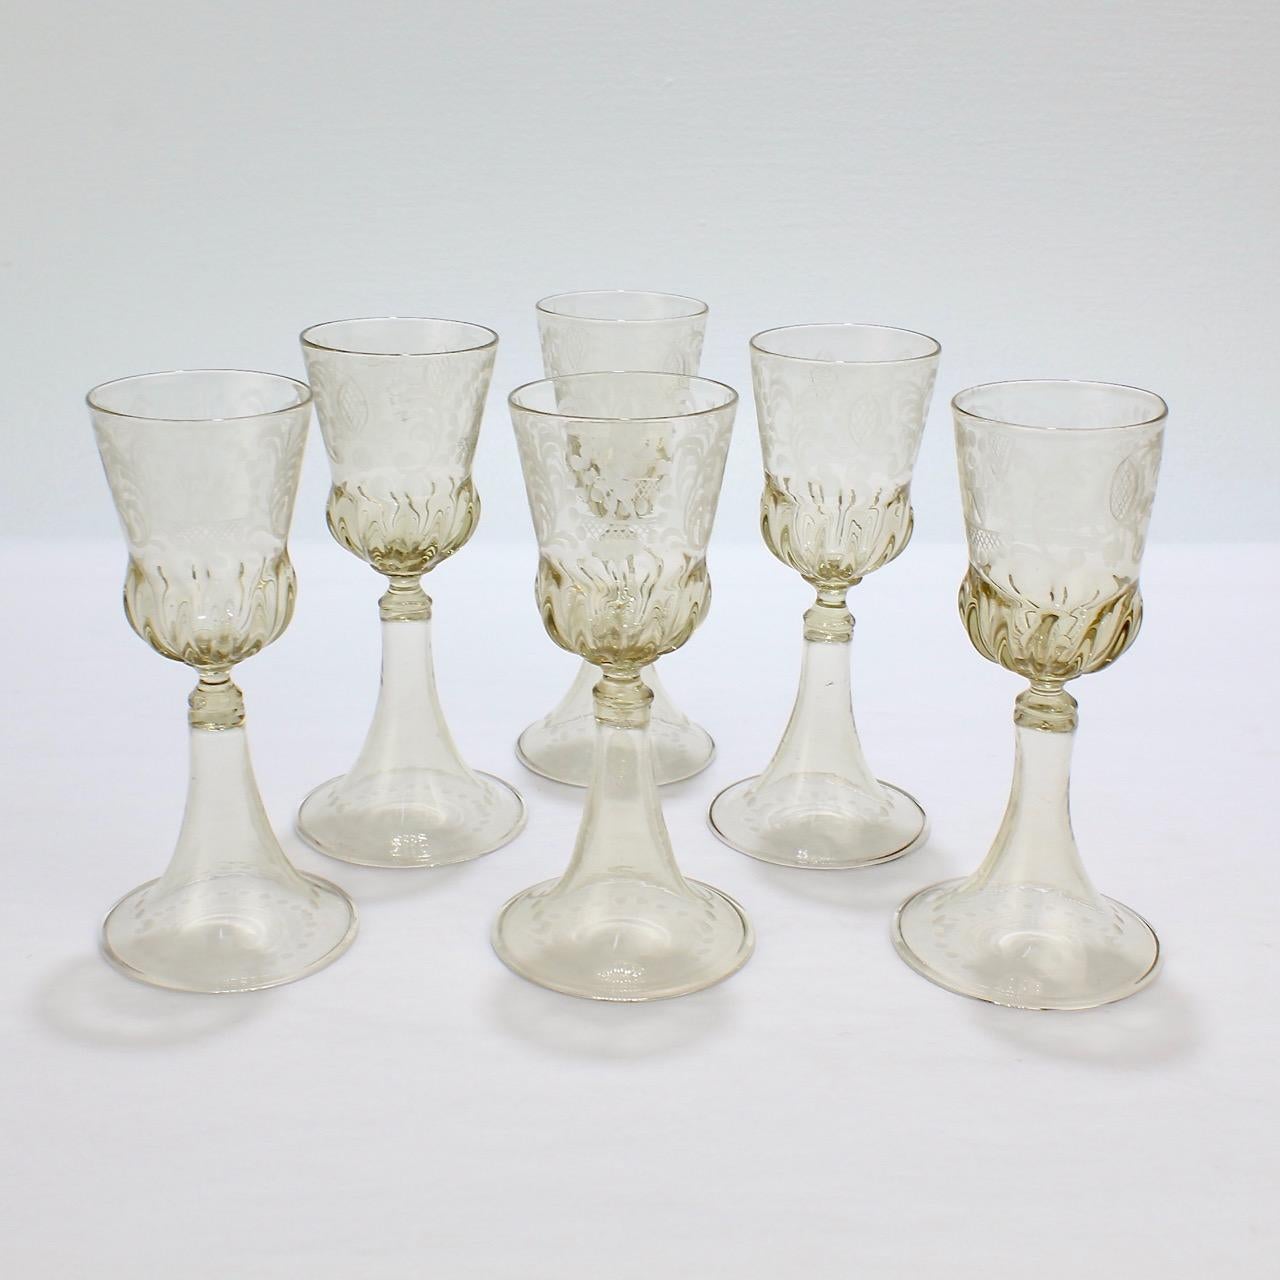 A good group of 6 vintage Venetian glass cordial glasses. 

Each with an aperitif or digestif cup capacity and very delicate hand feel. Perfect for your sherry or port.

Manufactured by Pauly and Co. in Venice, Italy in a light amber blown glass